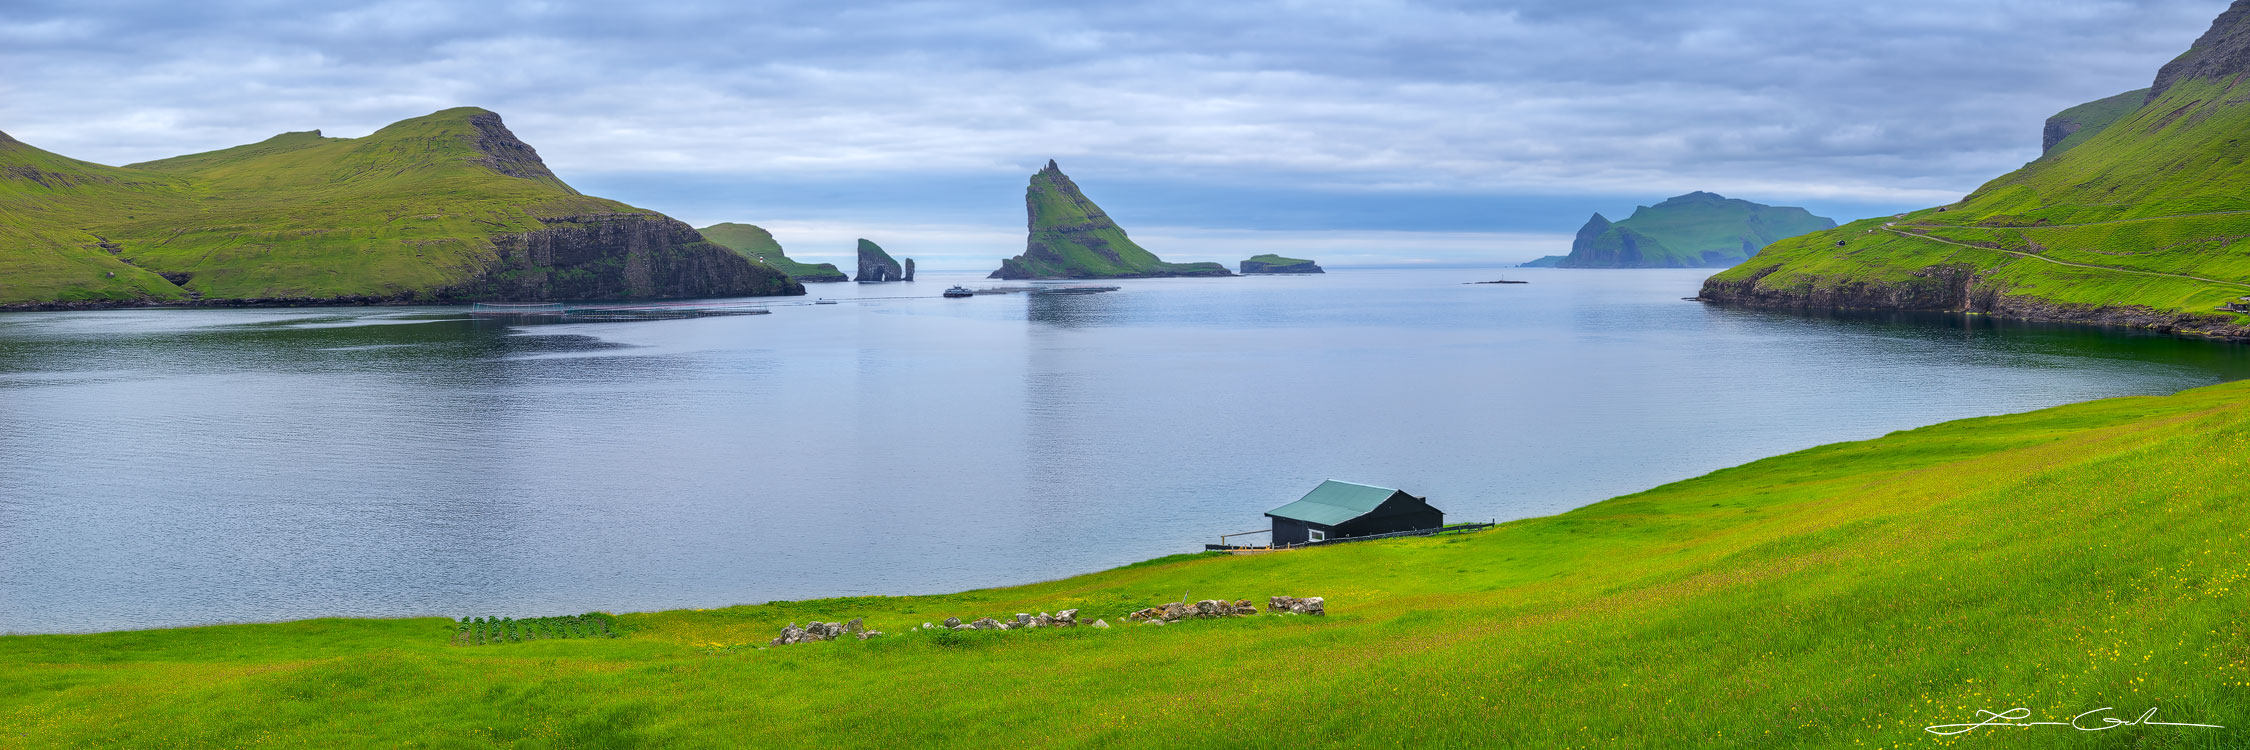 A charming cottage on the shore of a beautiful island surrounded by lots of green grass and wildflowers - Faroe Islands - Gintchin Fine Art